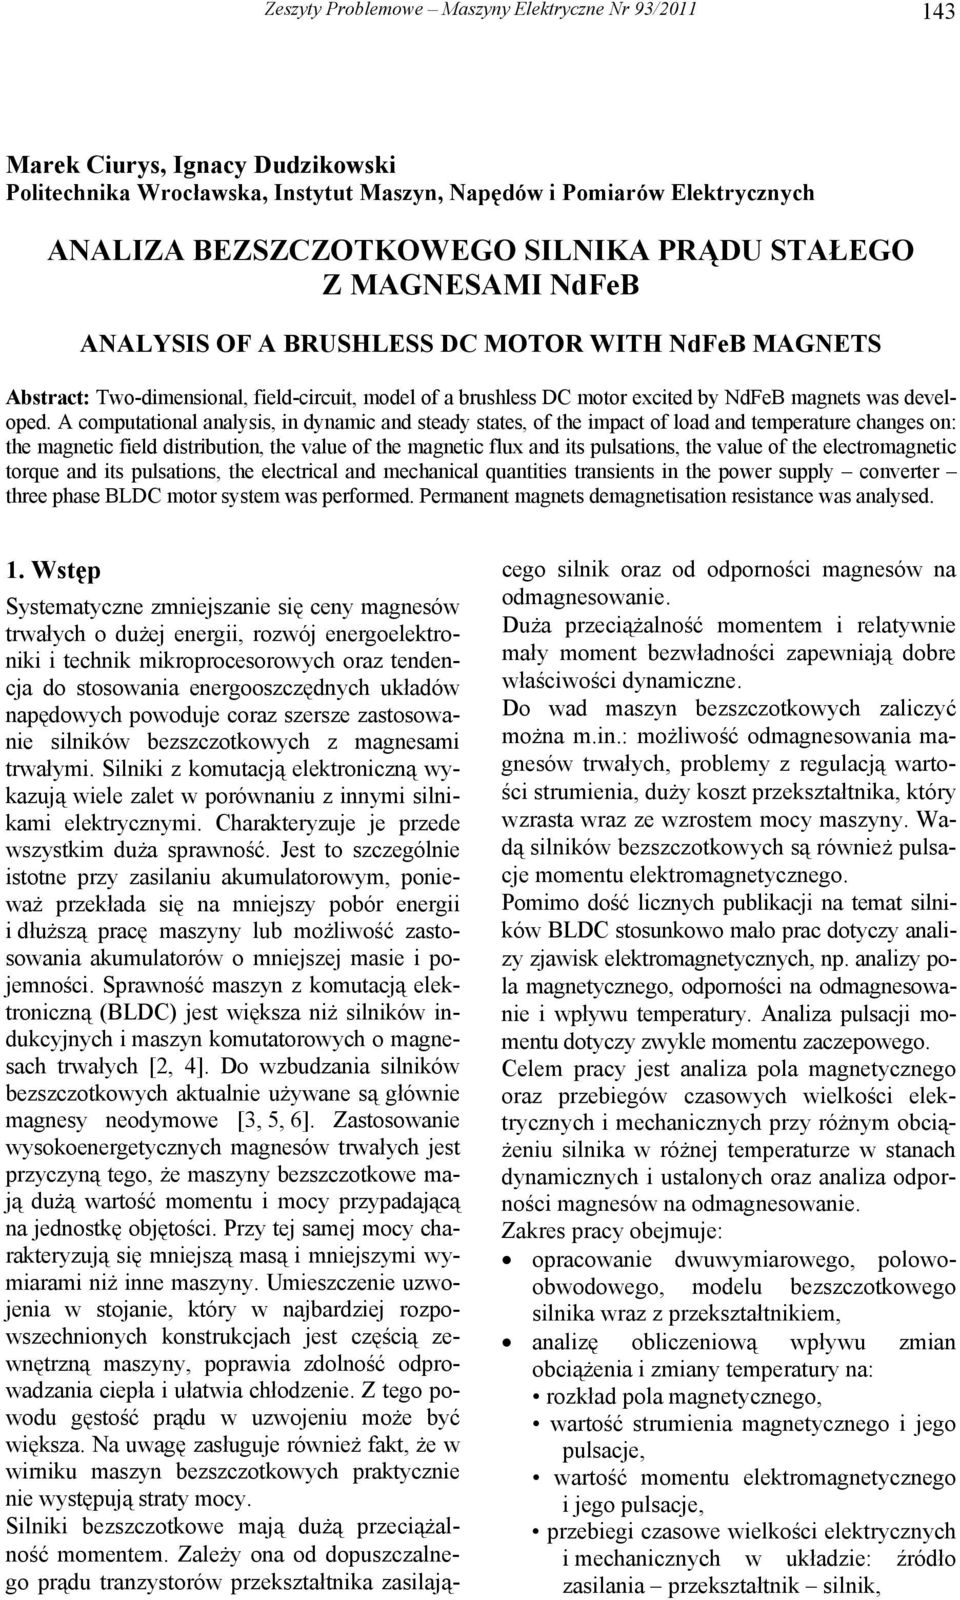 A computational analysis, in dynamic and steady states, of the impact of load and temperature changes on: the magnetic field distribution, the value of the magnetic flux and its pulsations, the value